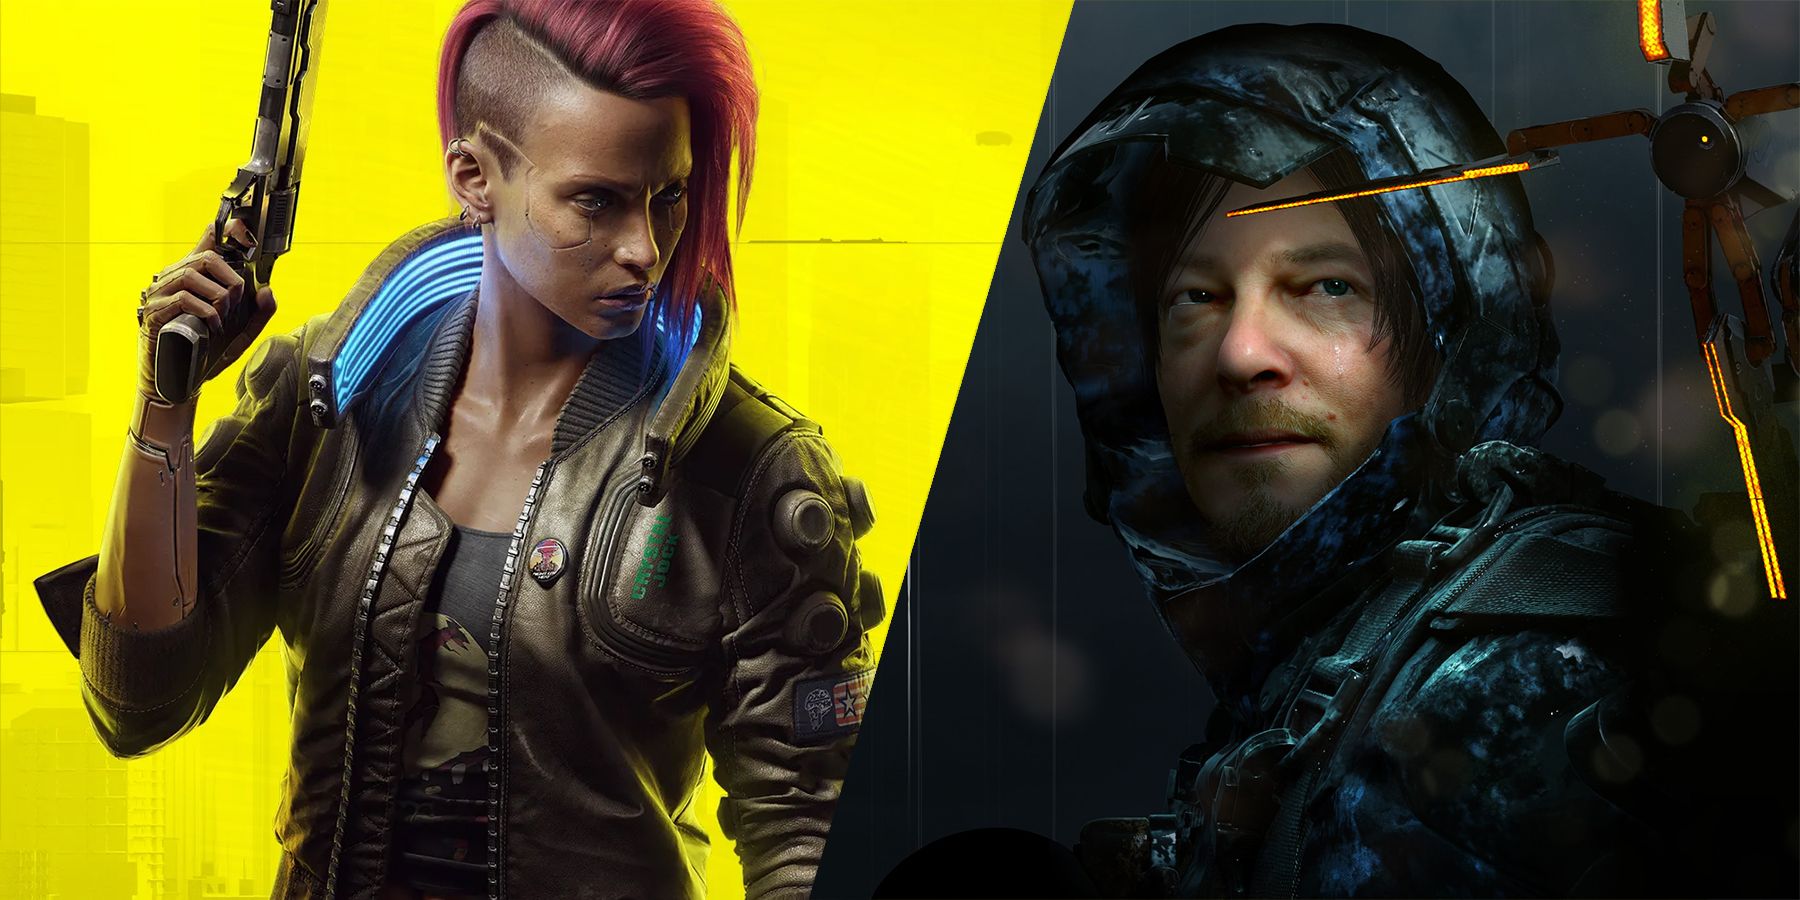 Cyberpunk 2077 and Death Stranding covers collage